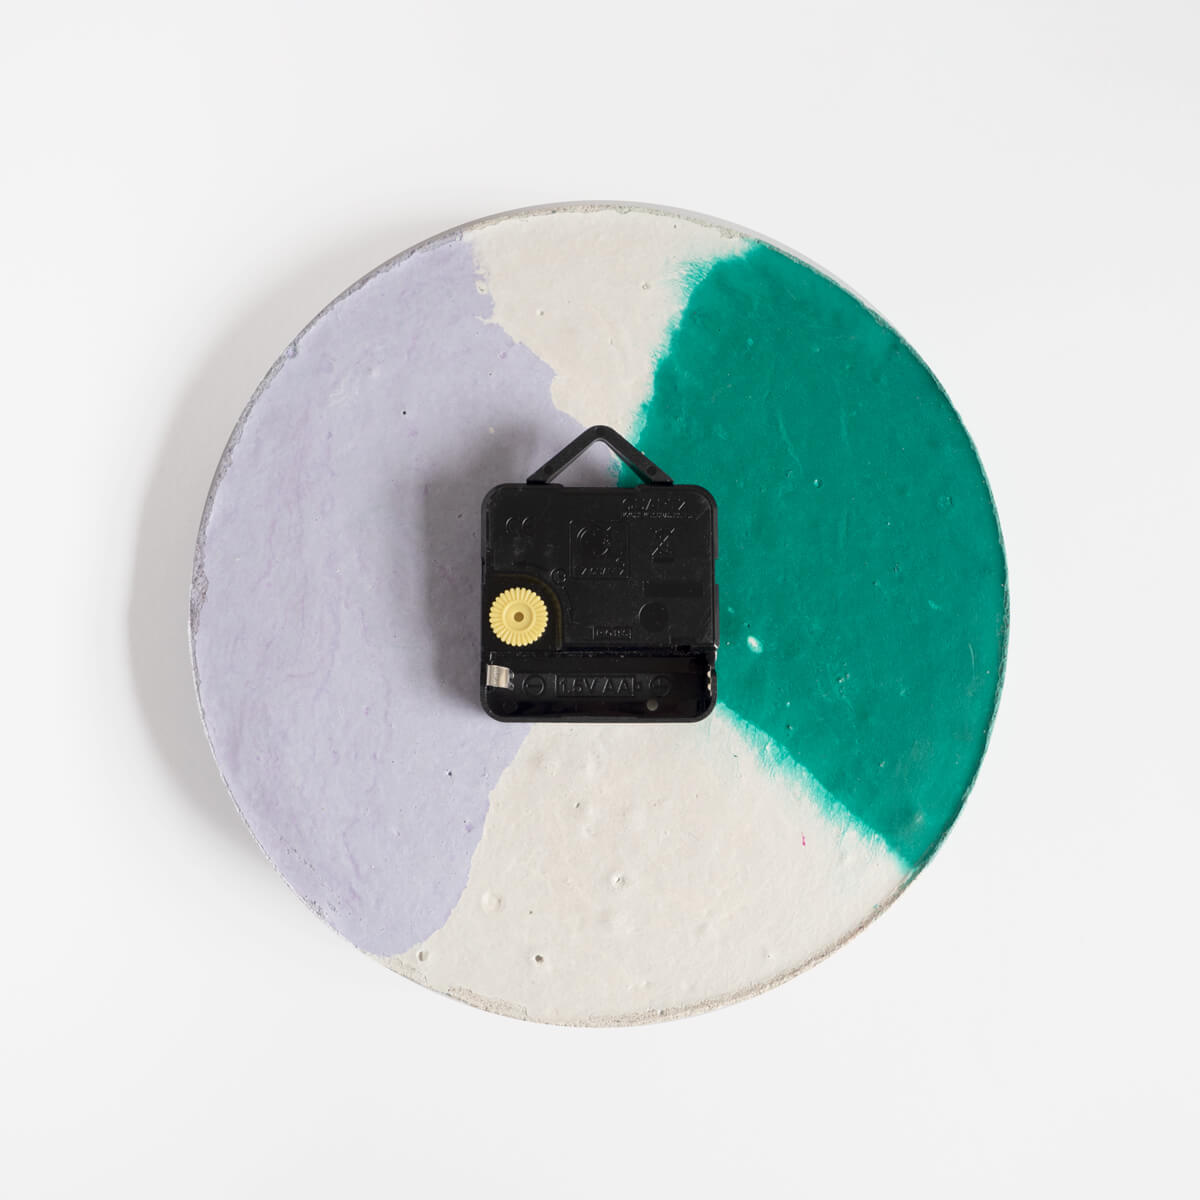 The back of a round concrete wall clock by Studio Emma for Curious Makers